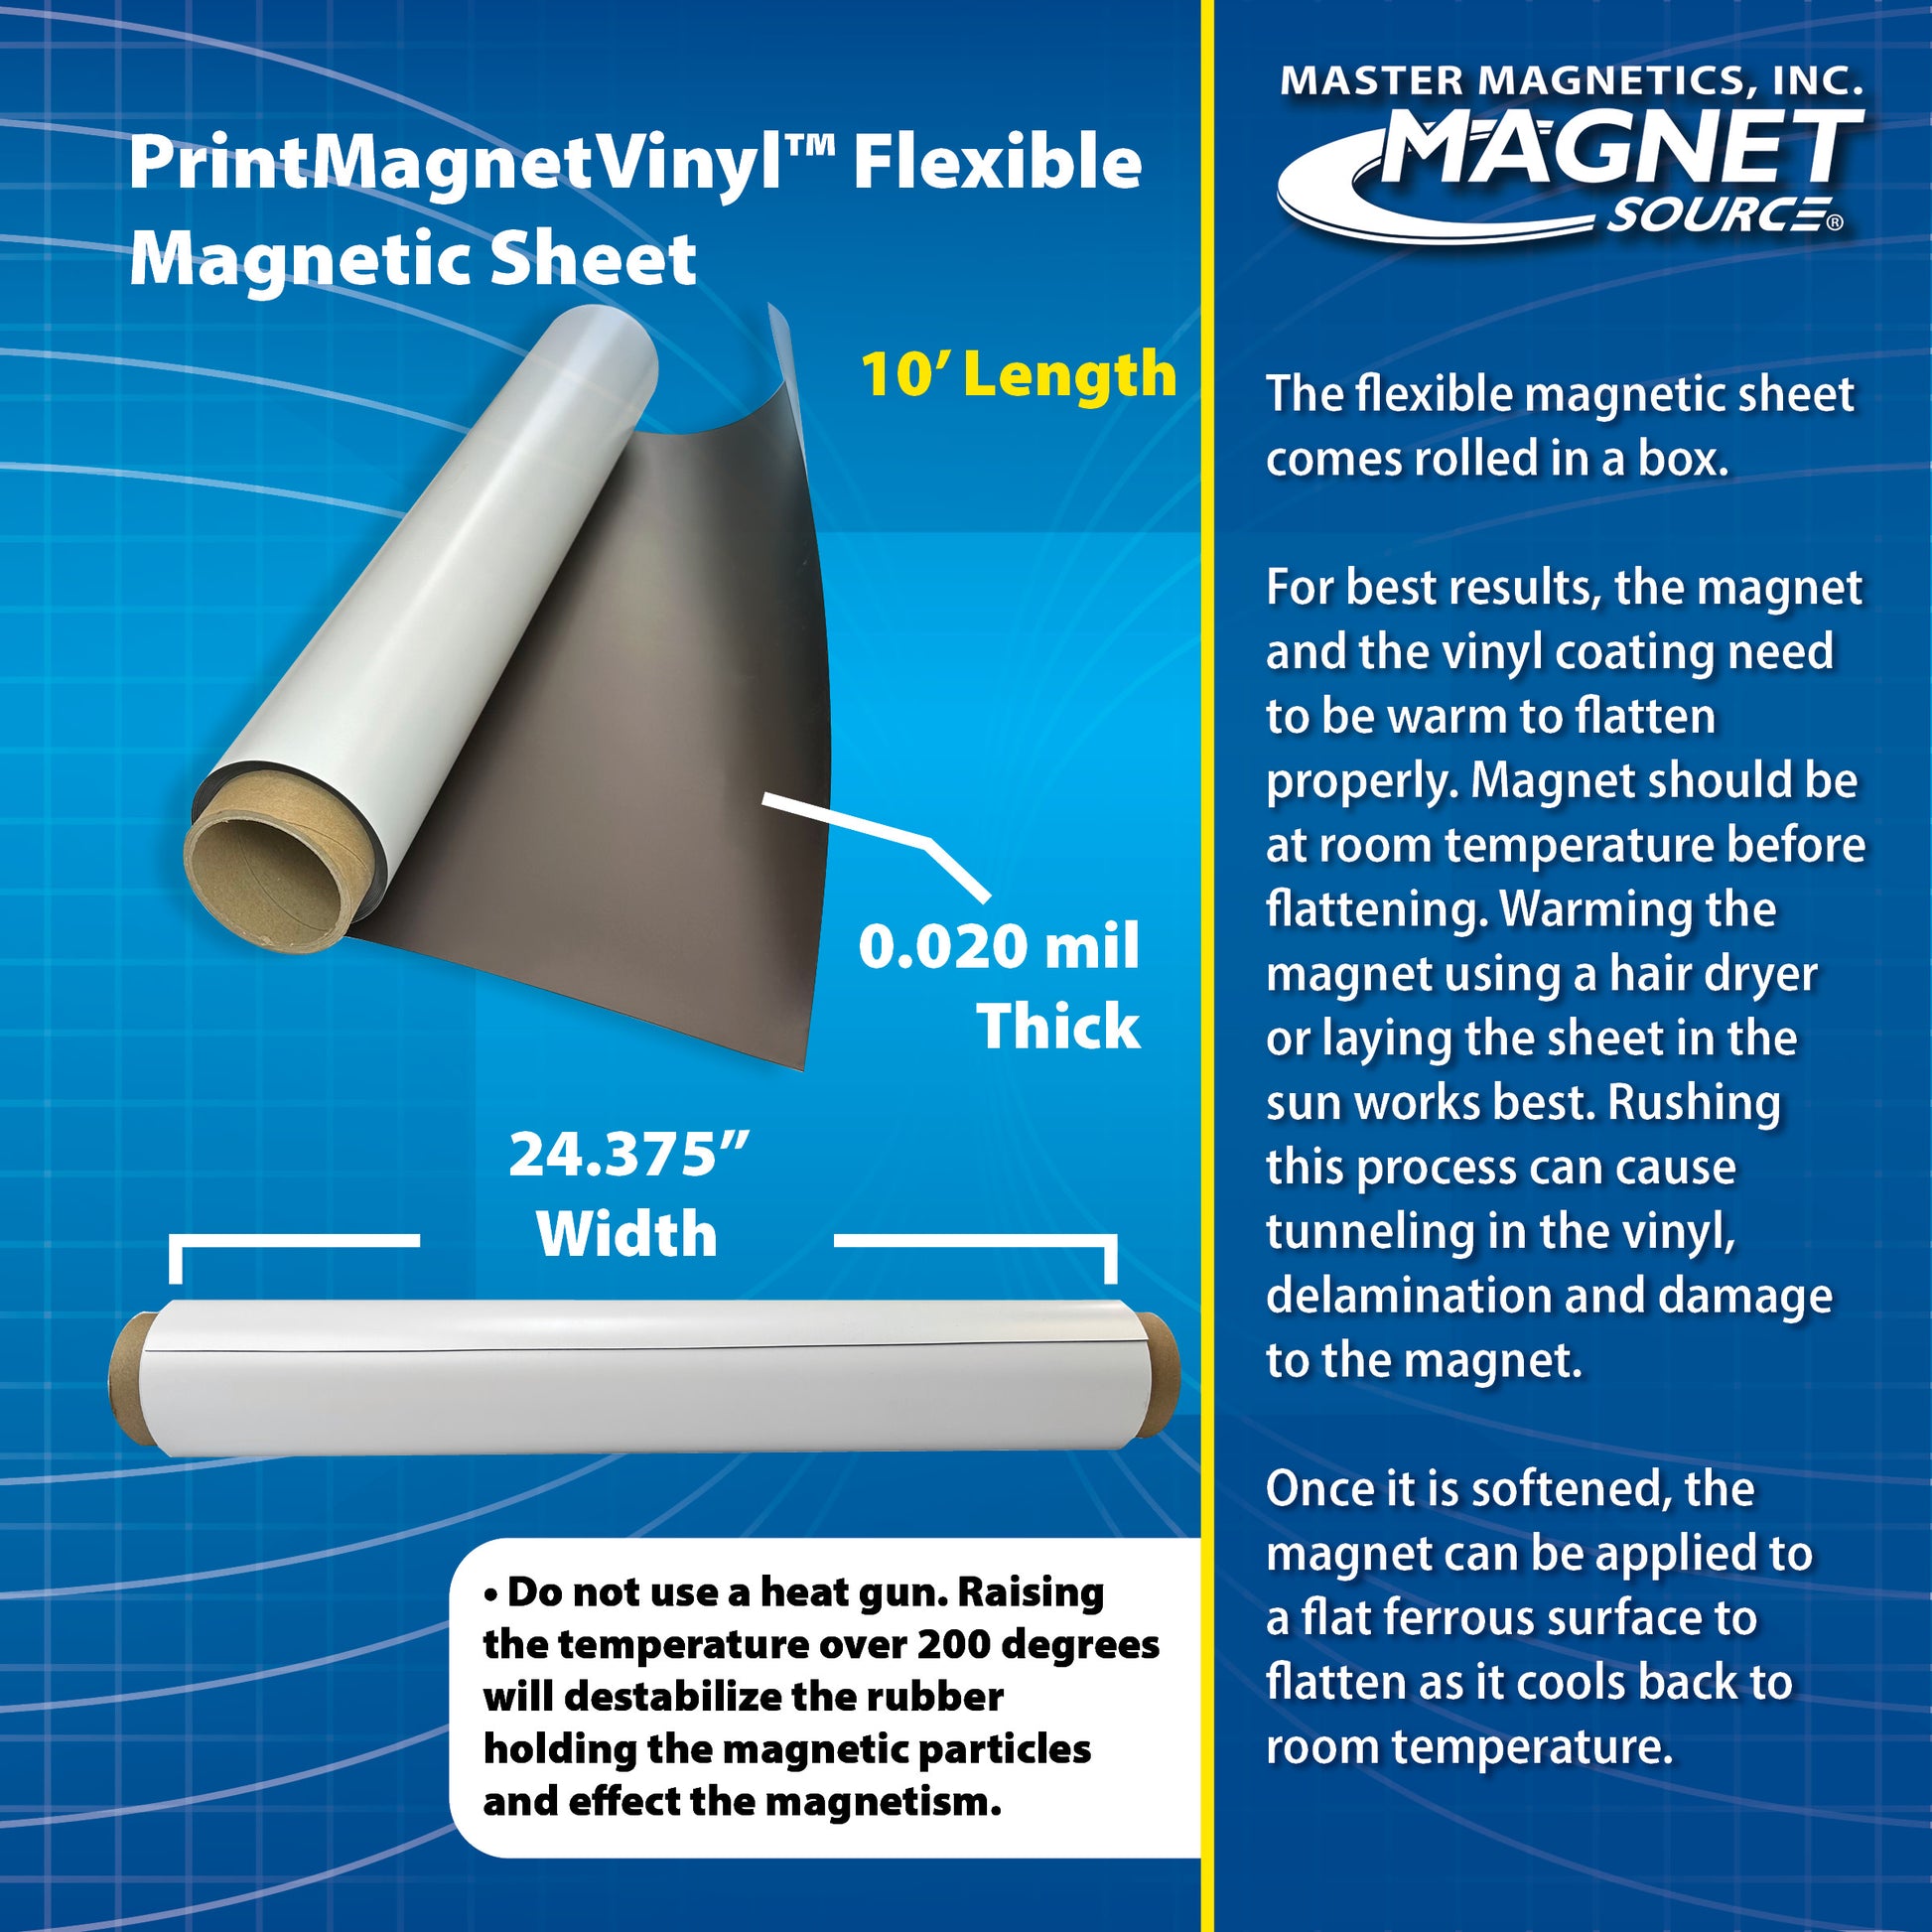 Load image into Gallery viewer, ZGN2024GW10 PrintMagnetVinyl™ Flexible Magnetic Sheet - Specifications